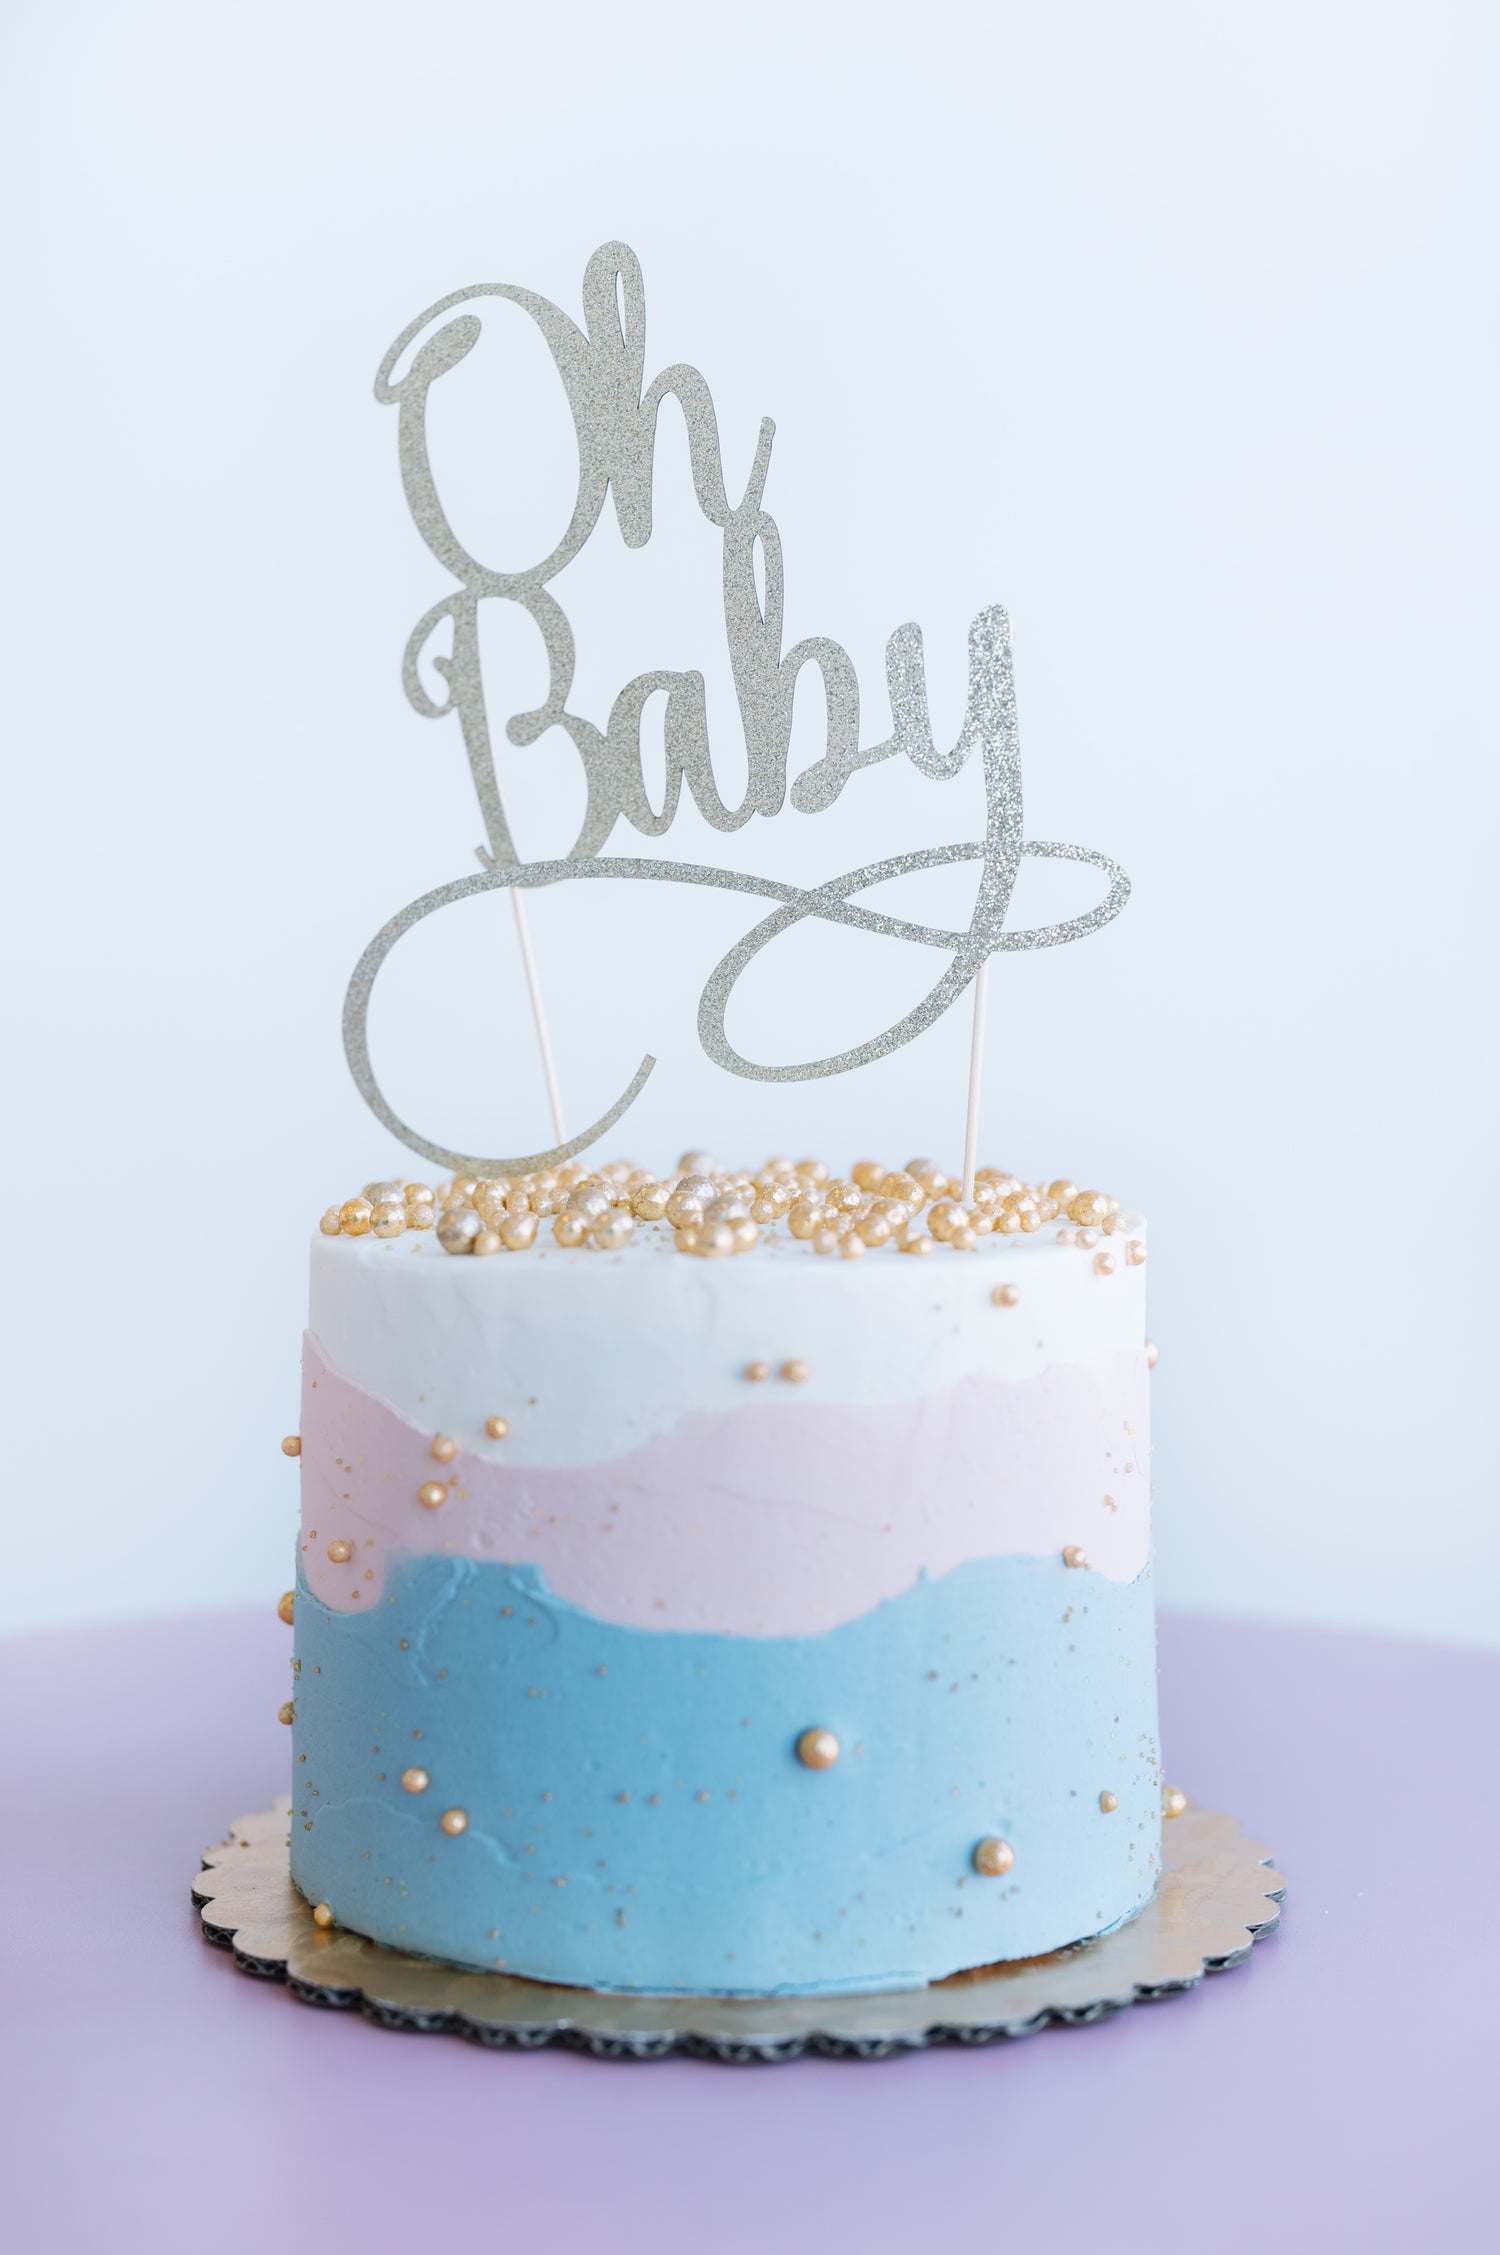 The best cake recipe for baby shower fondant decorations